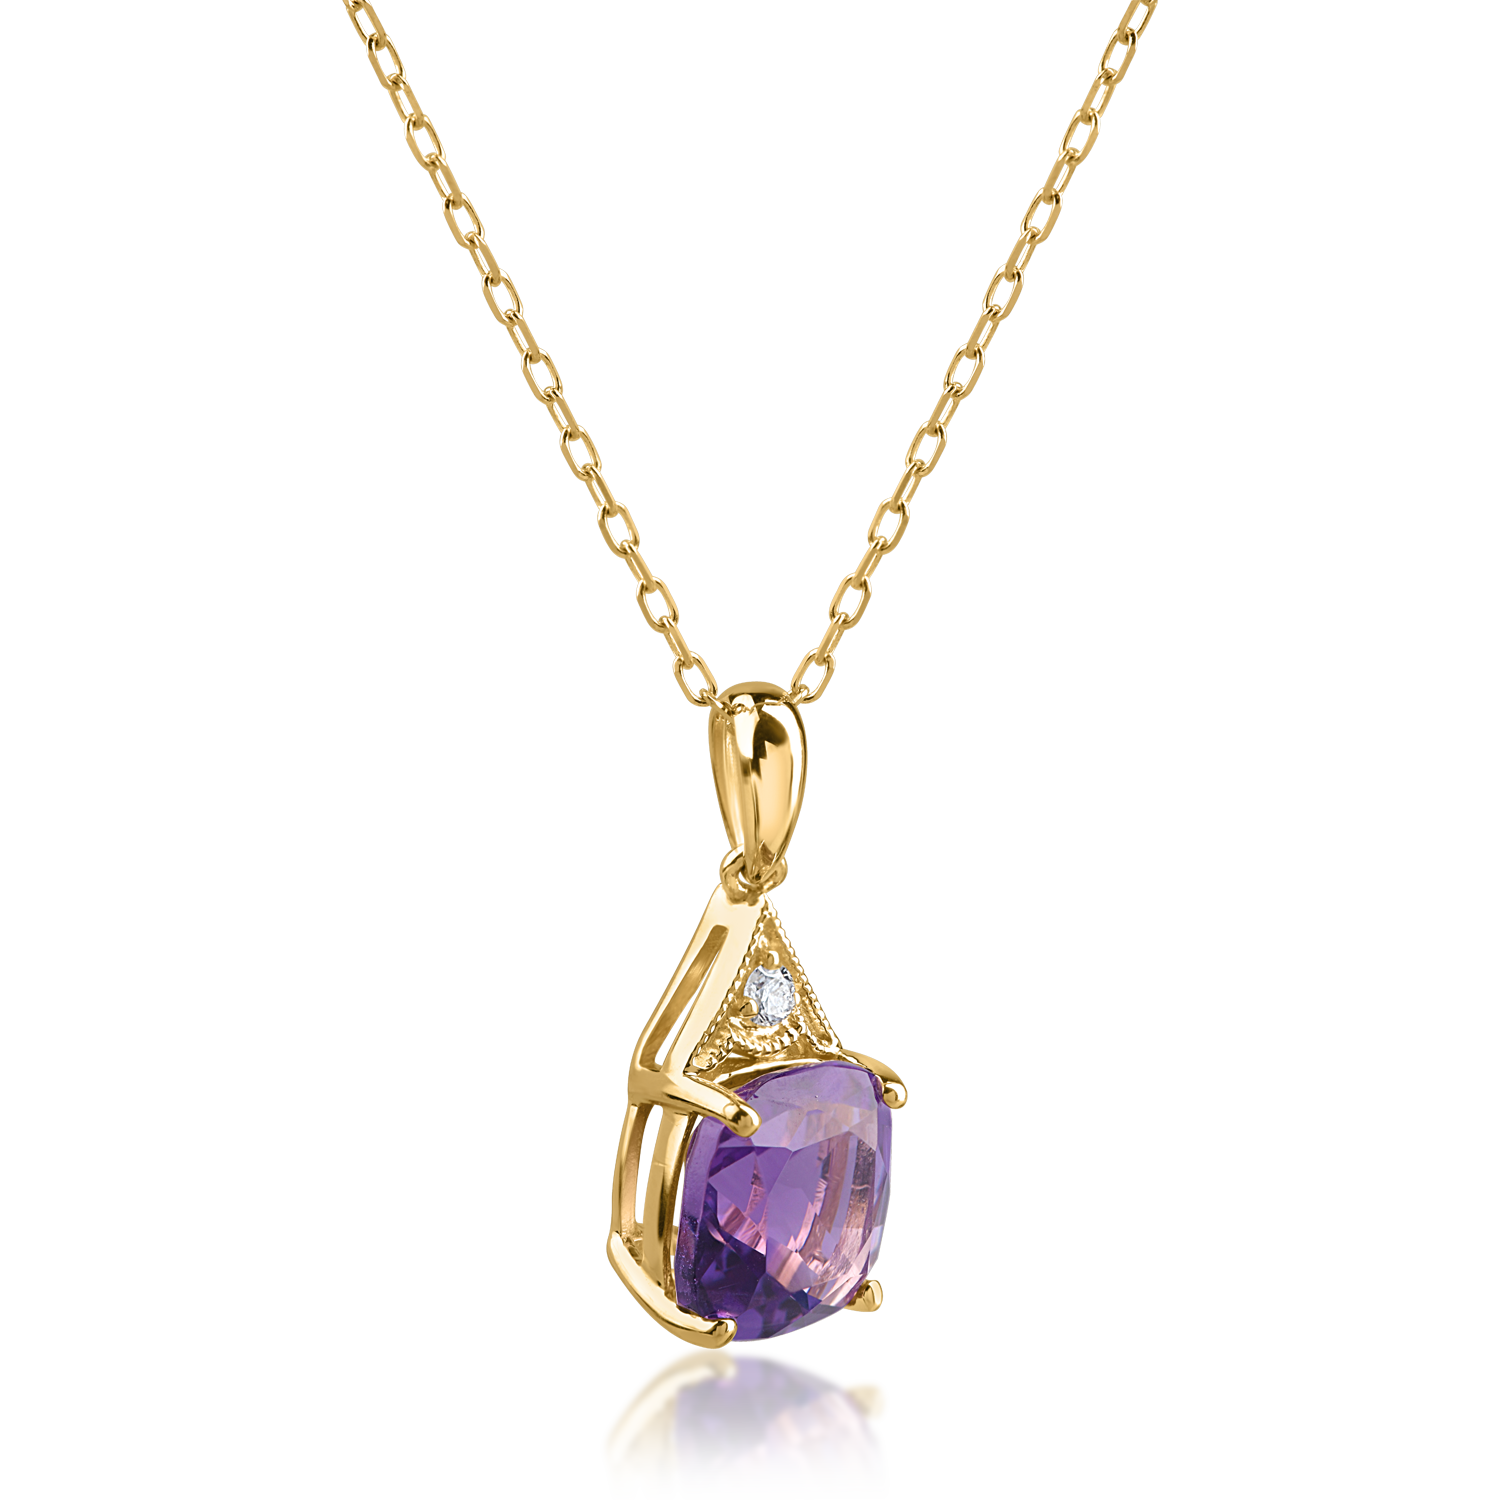 Yellow gold pendant necklace with 1.46ct amethyst and 0.02ct diamond